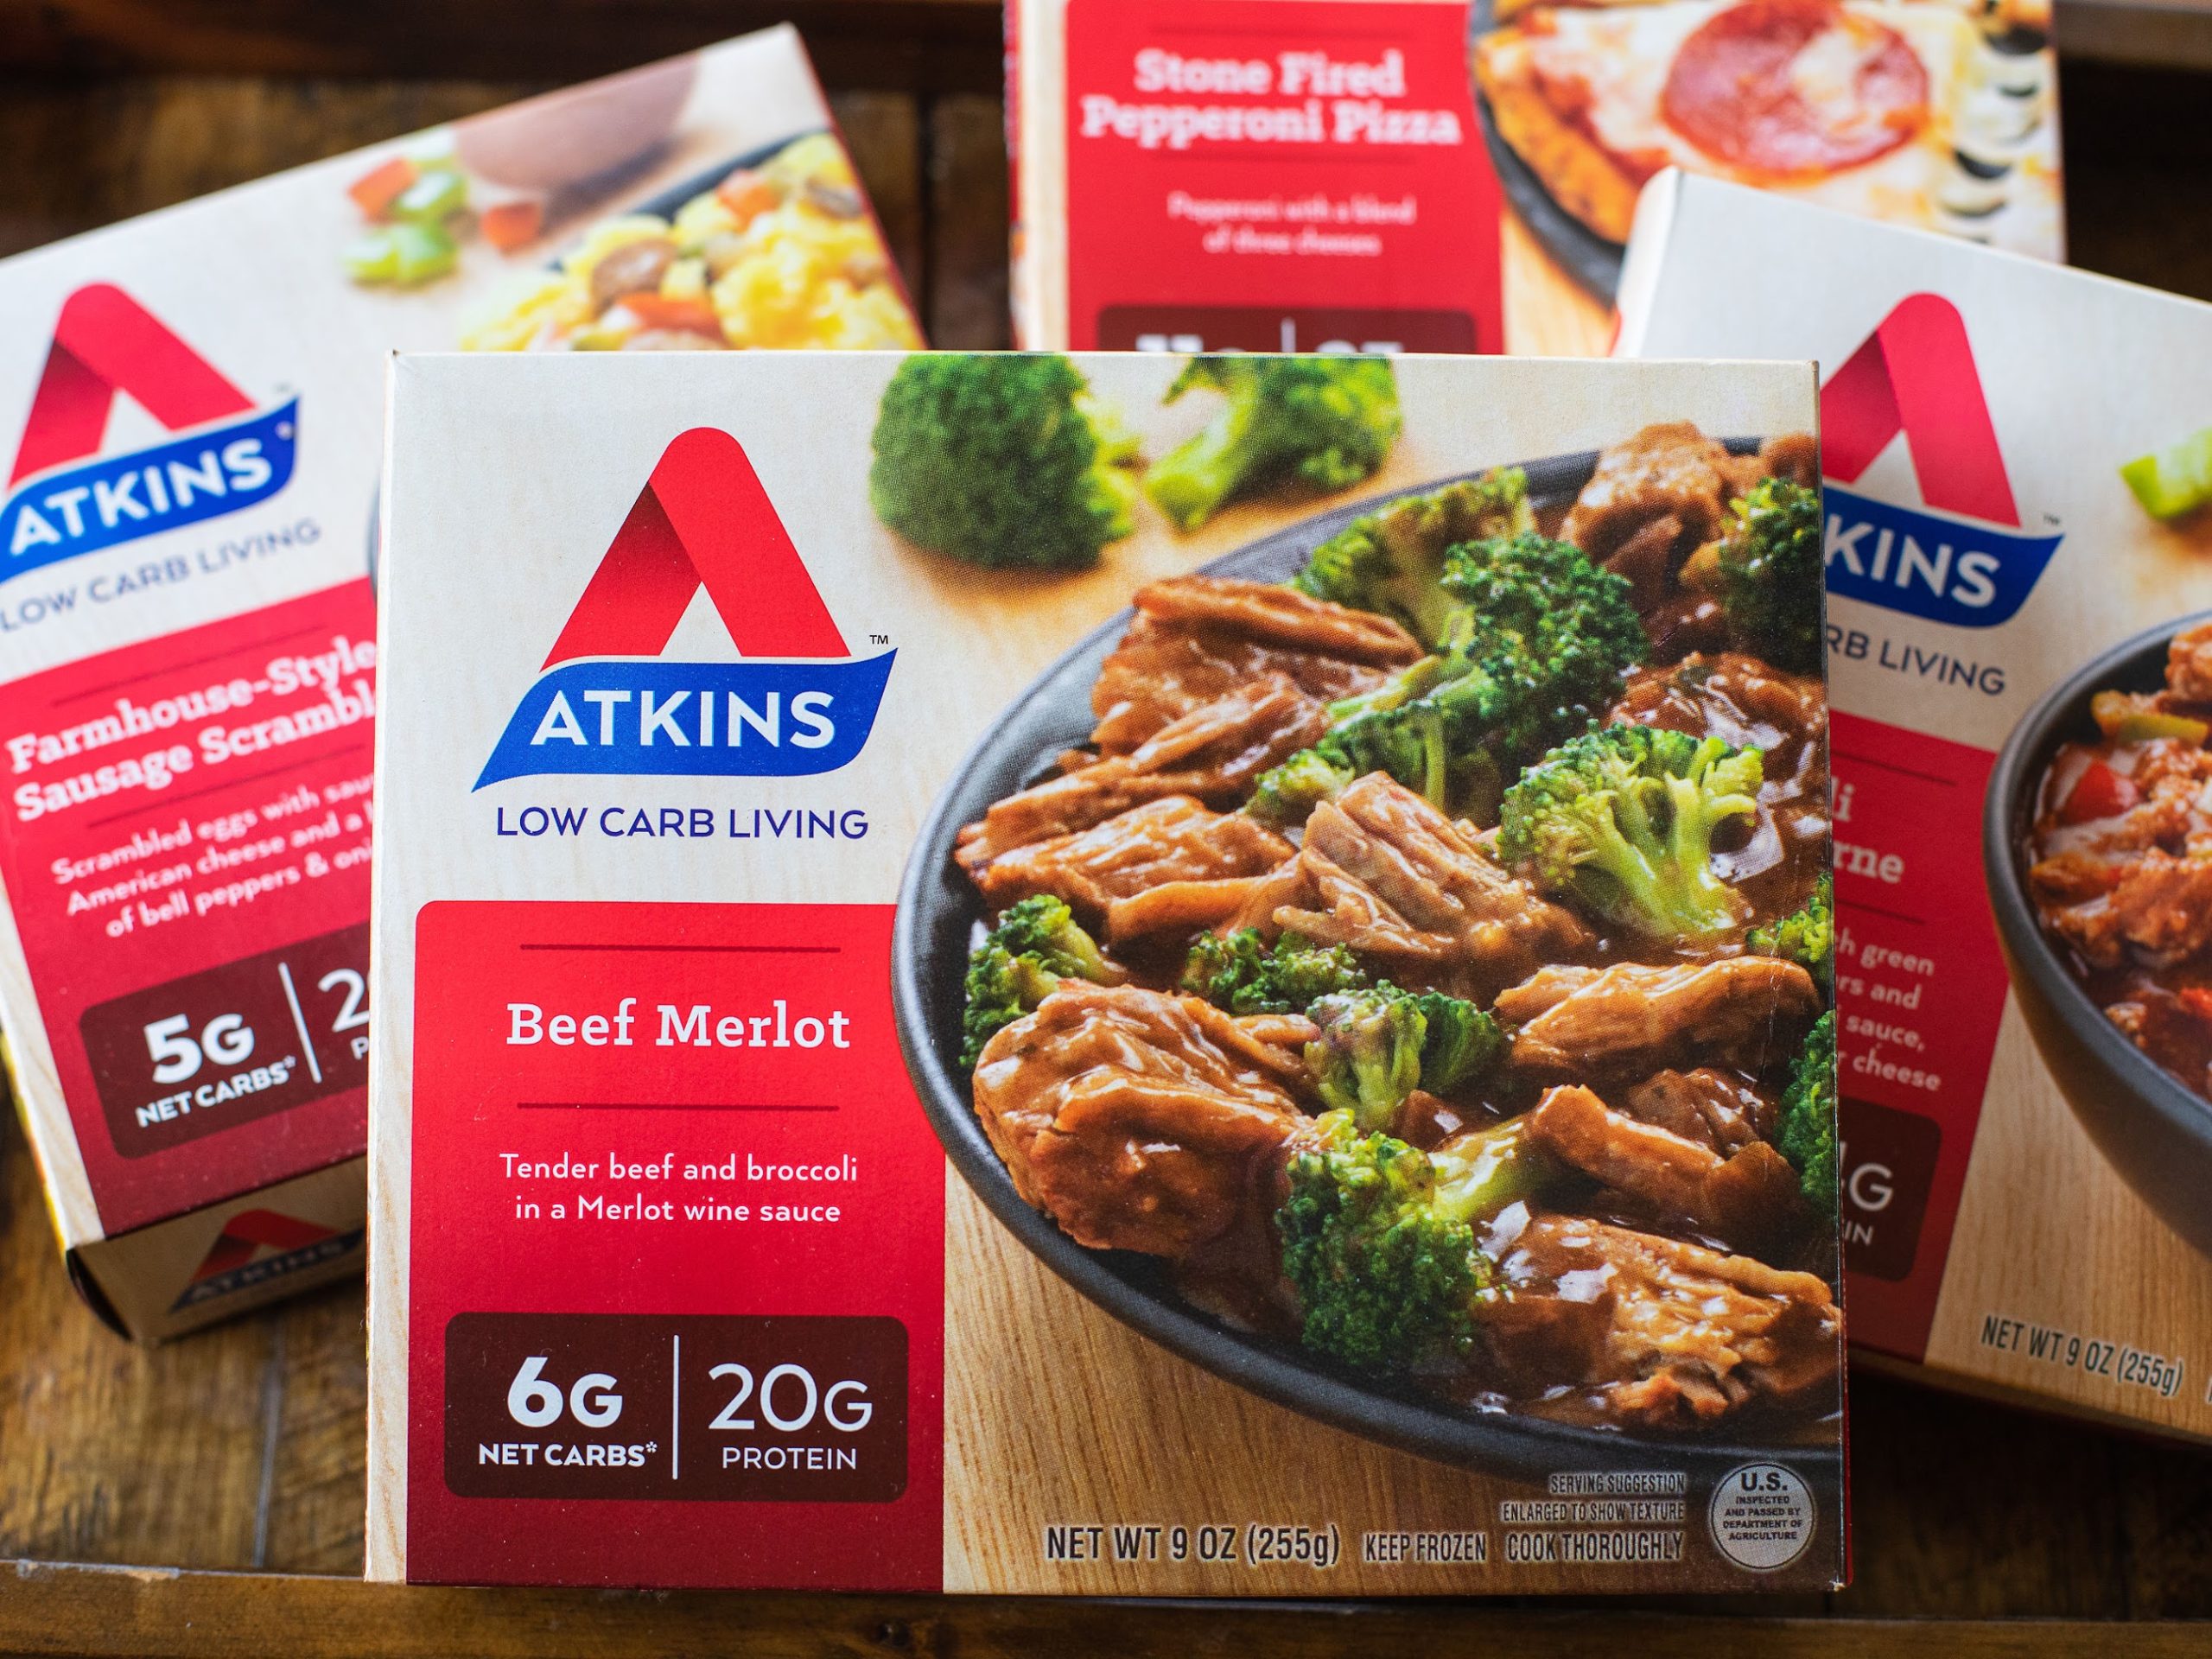 Look For Savings On Delicious Atkins Products At Your Local Publix on I Heart Publix 3